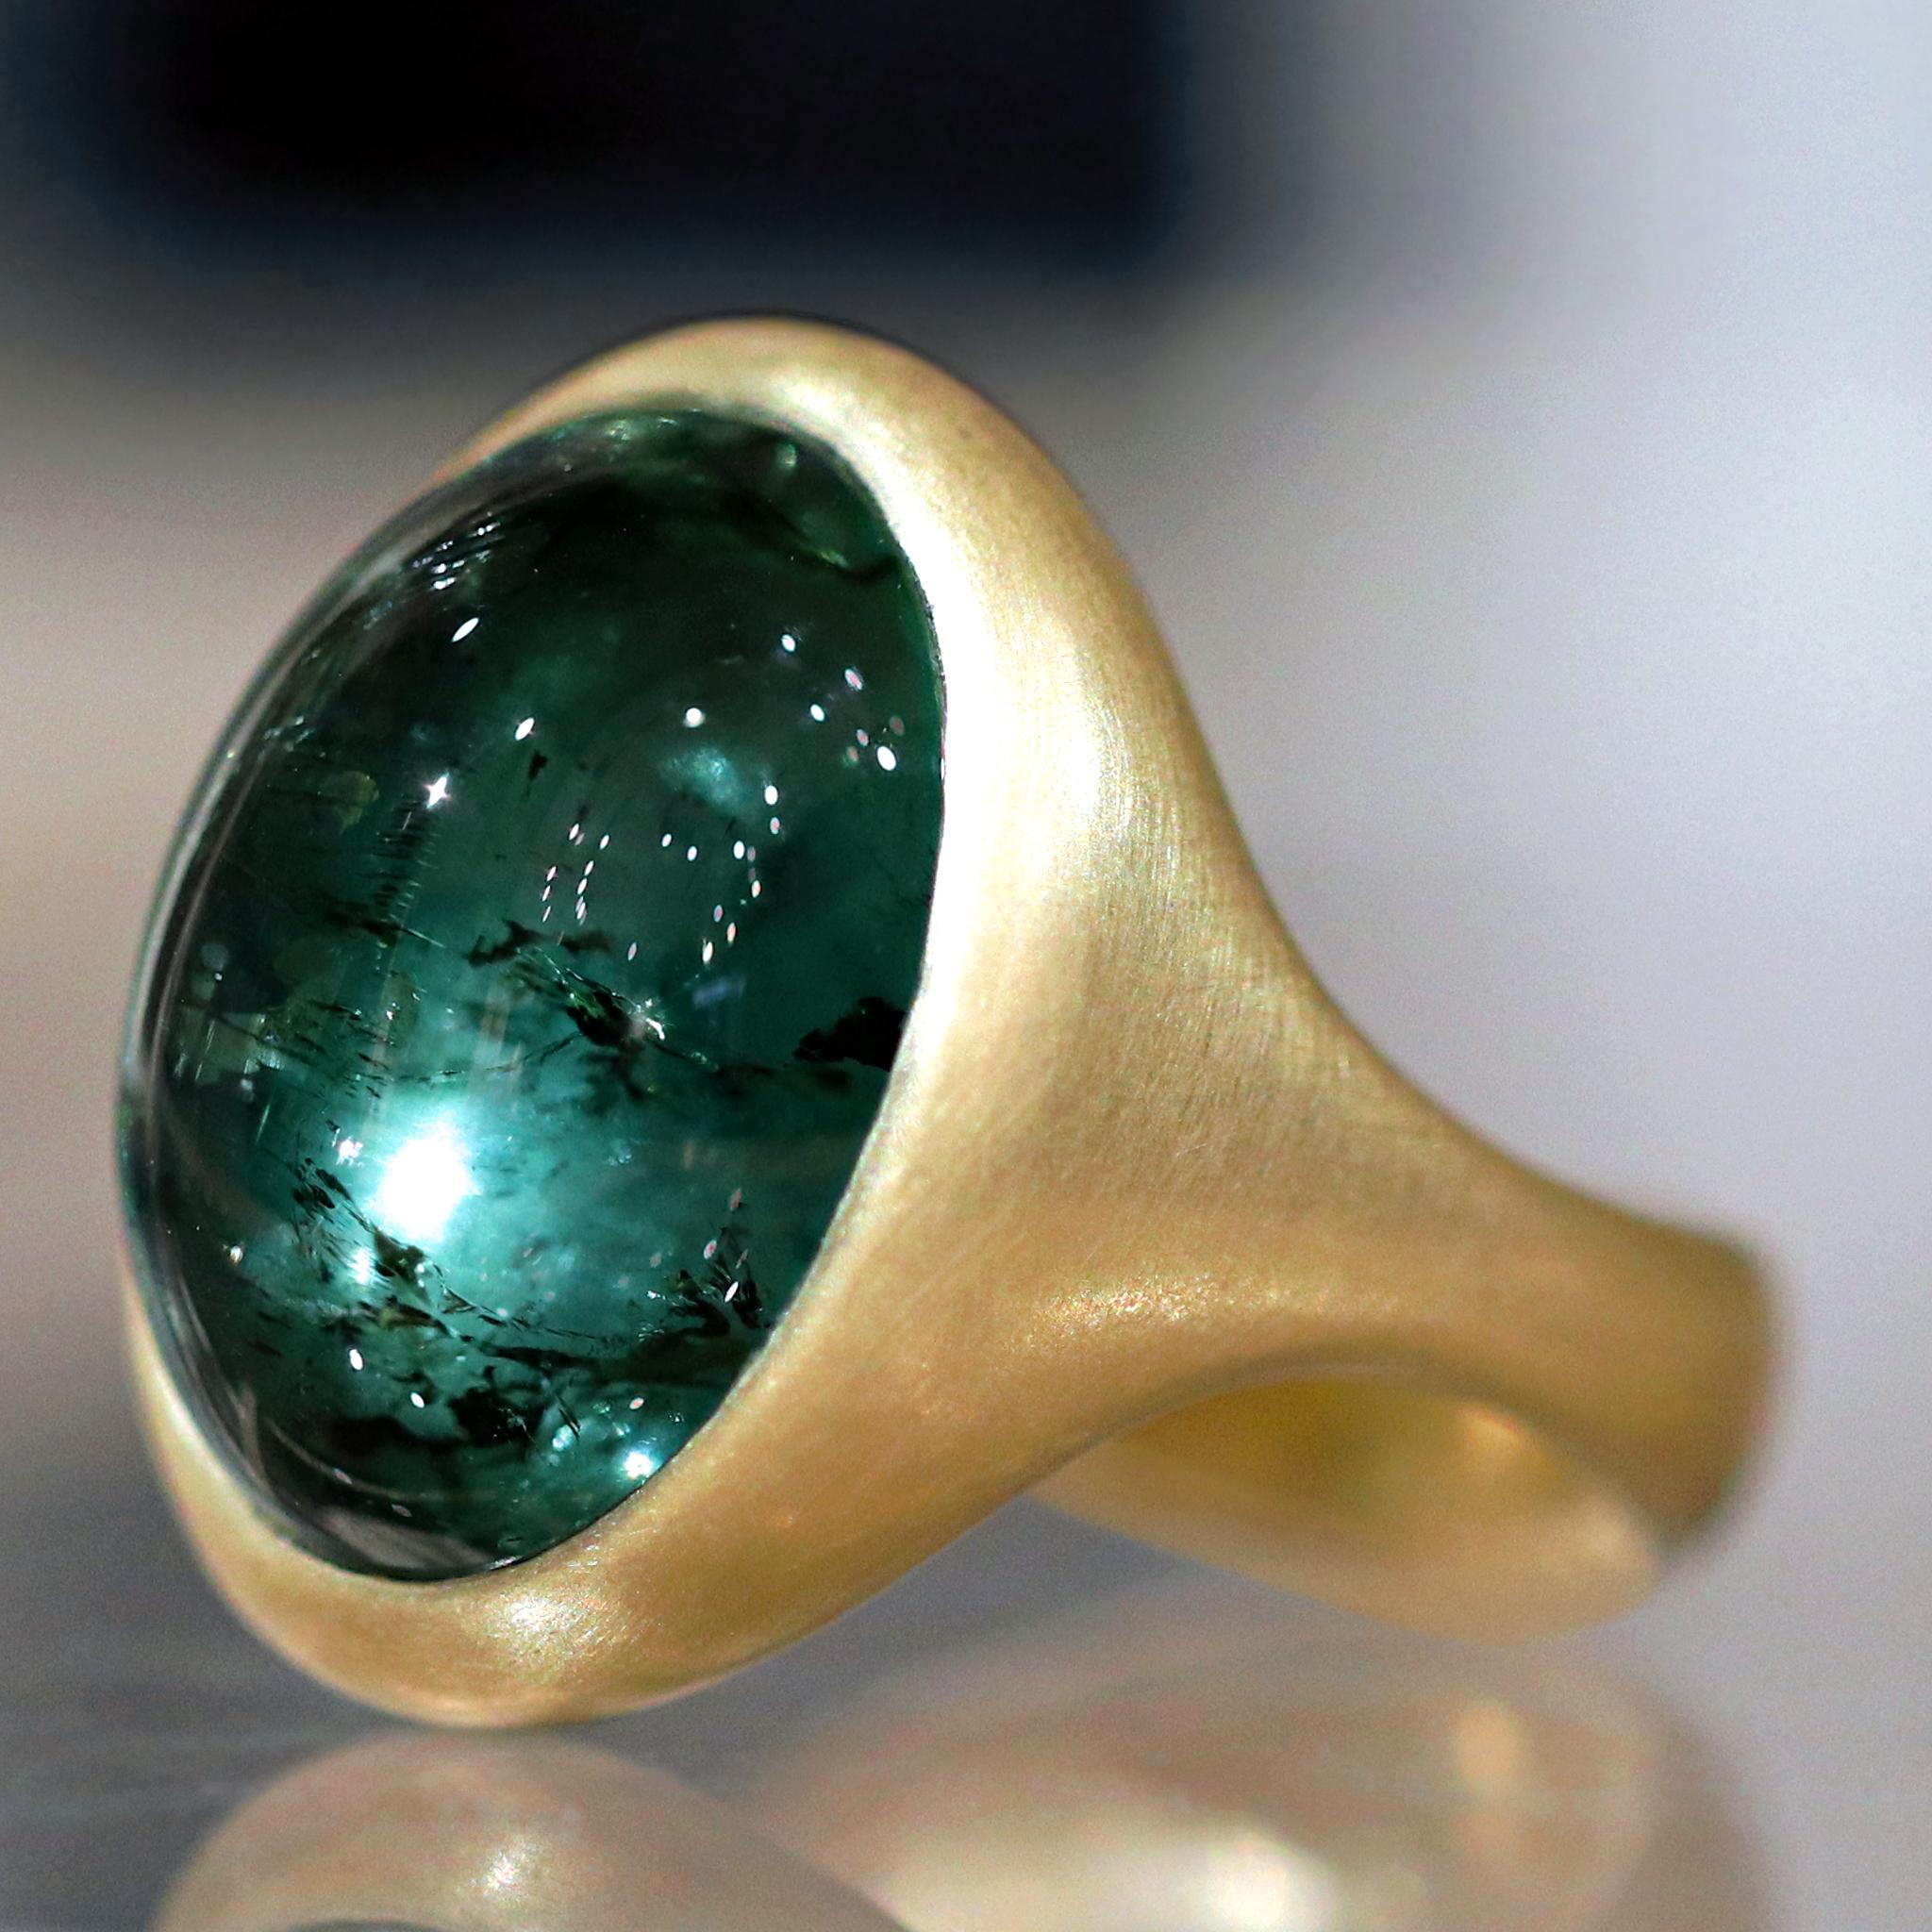 One of a Kind Ring hand-fabricated by jewelry maker Lola Brooks featuring an extraordinary glowing 23.69 carat lush blue green tourmaline cabochon bezel-set in the artist's signature cast and intricately-finished 18k yellow gold. Size 6.5 (can be